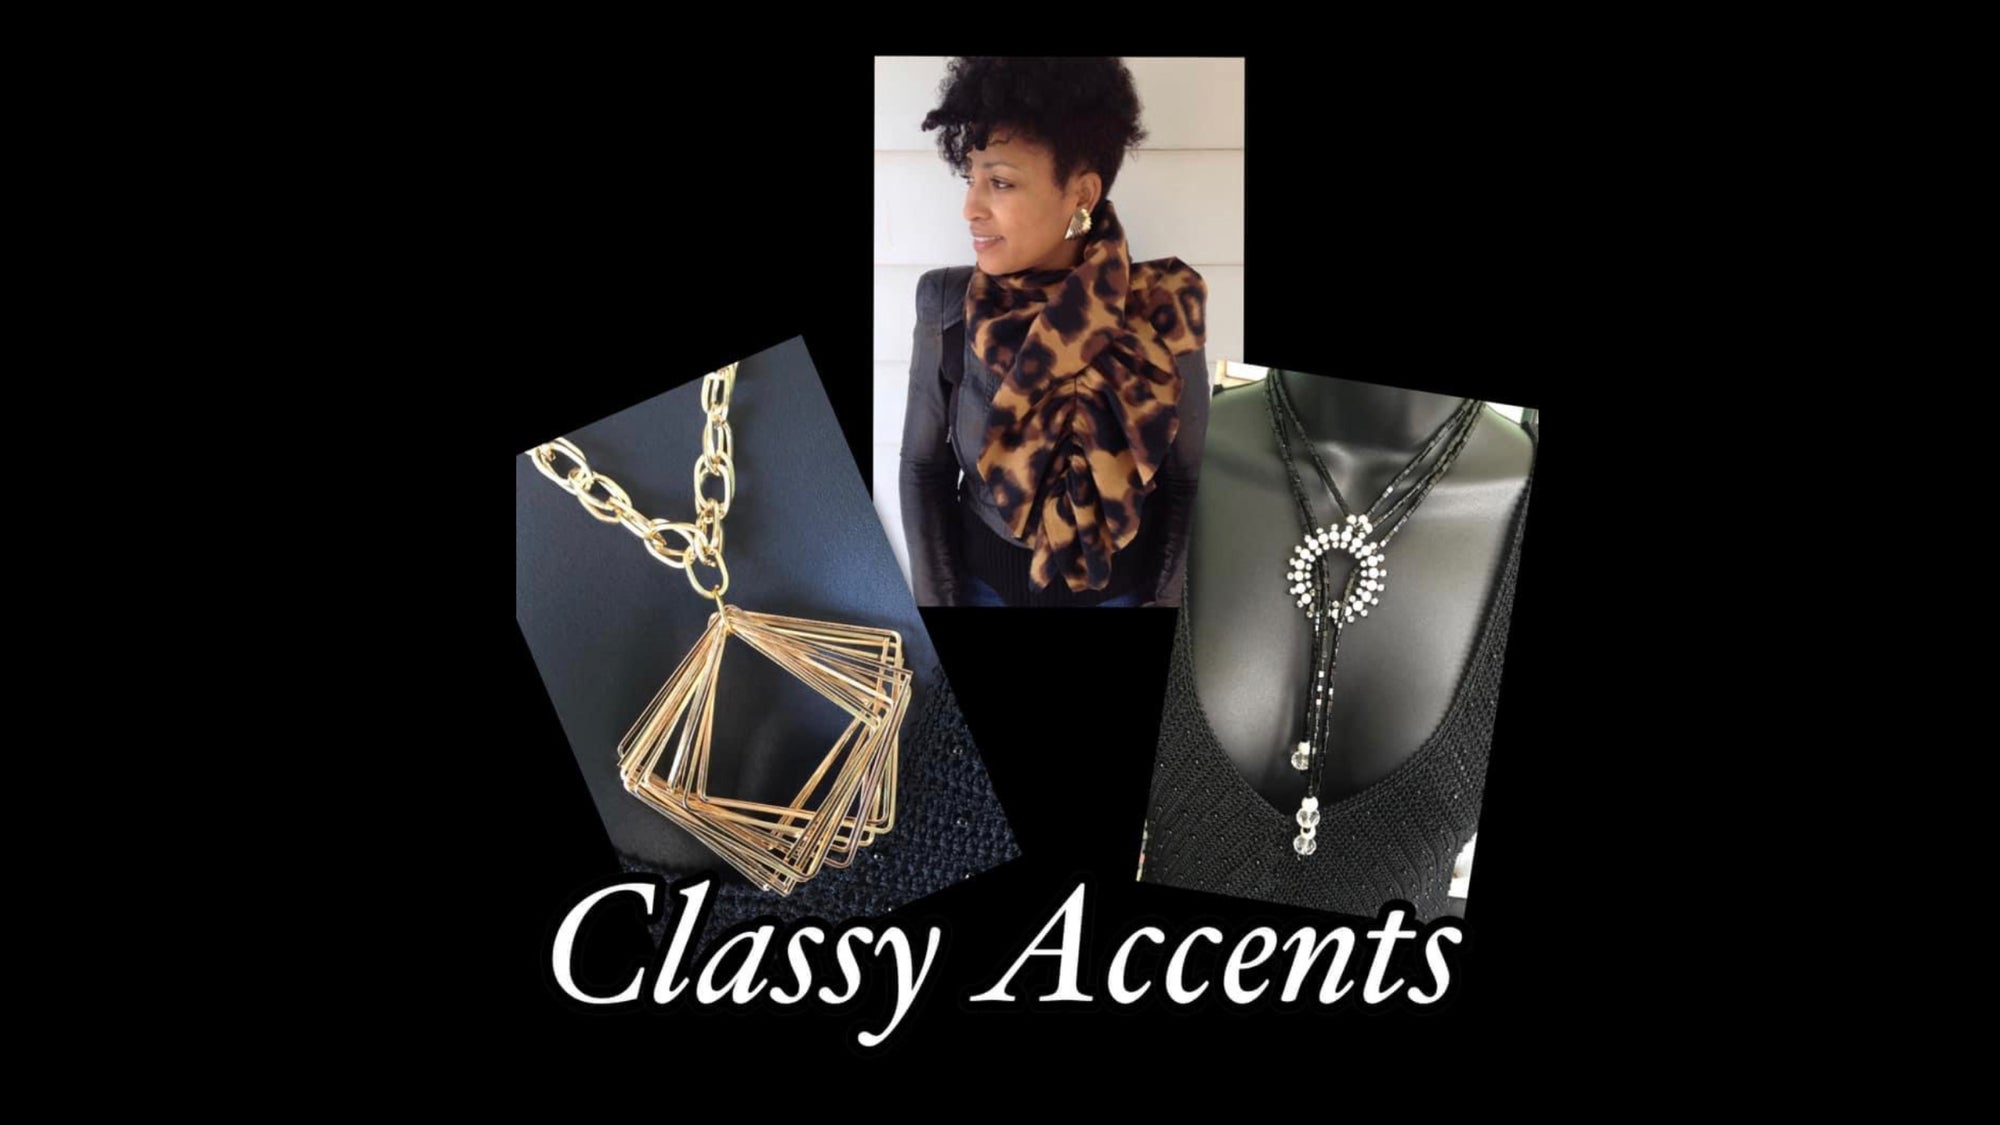 The Classy Accents 